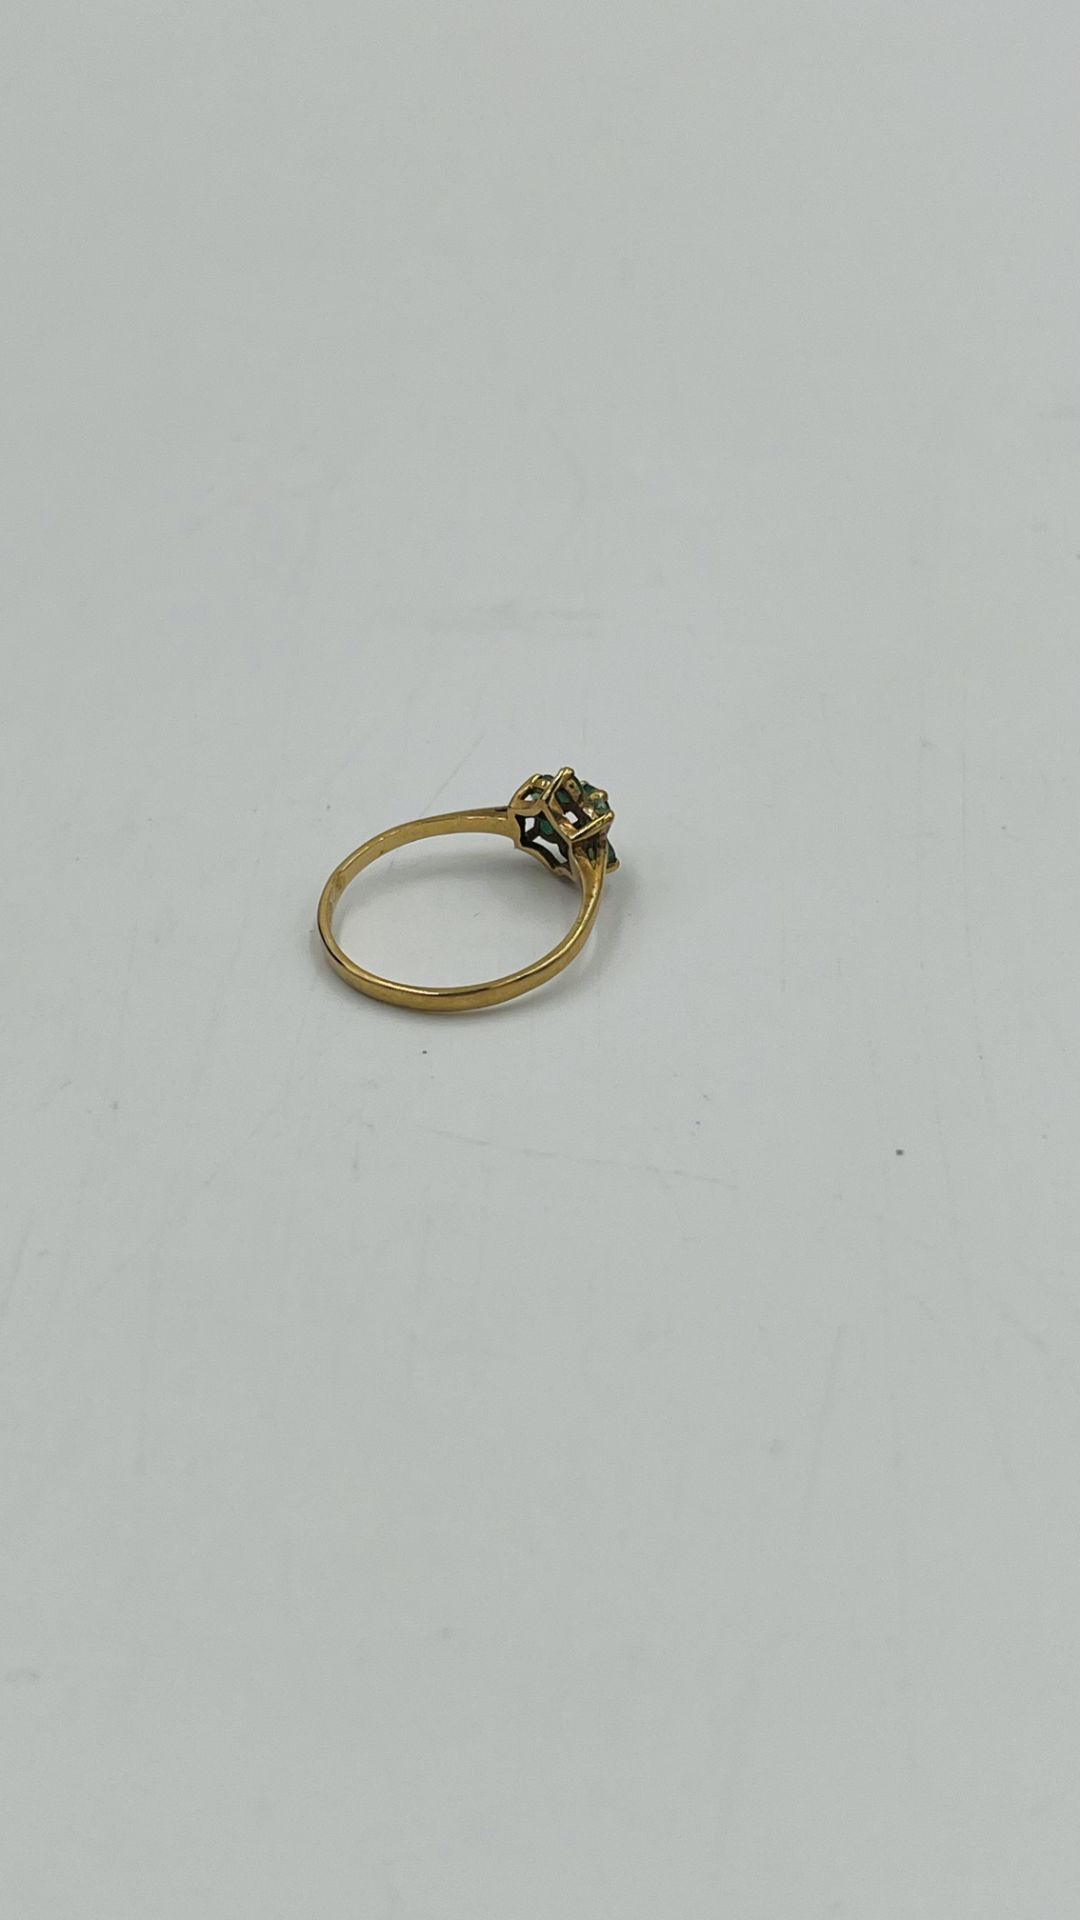 9ct gold ring set with jade - Image 4 of 6